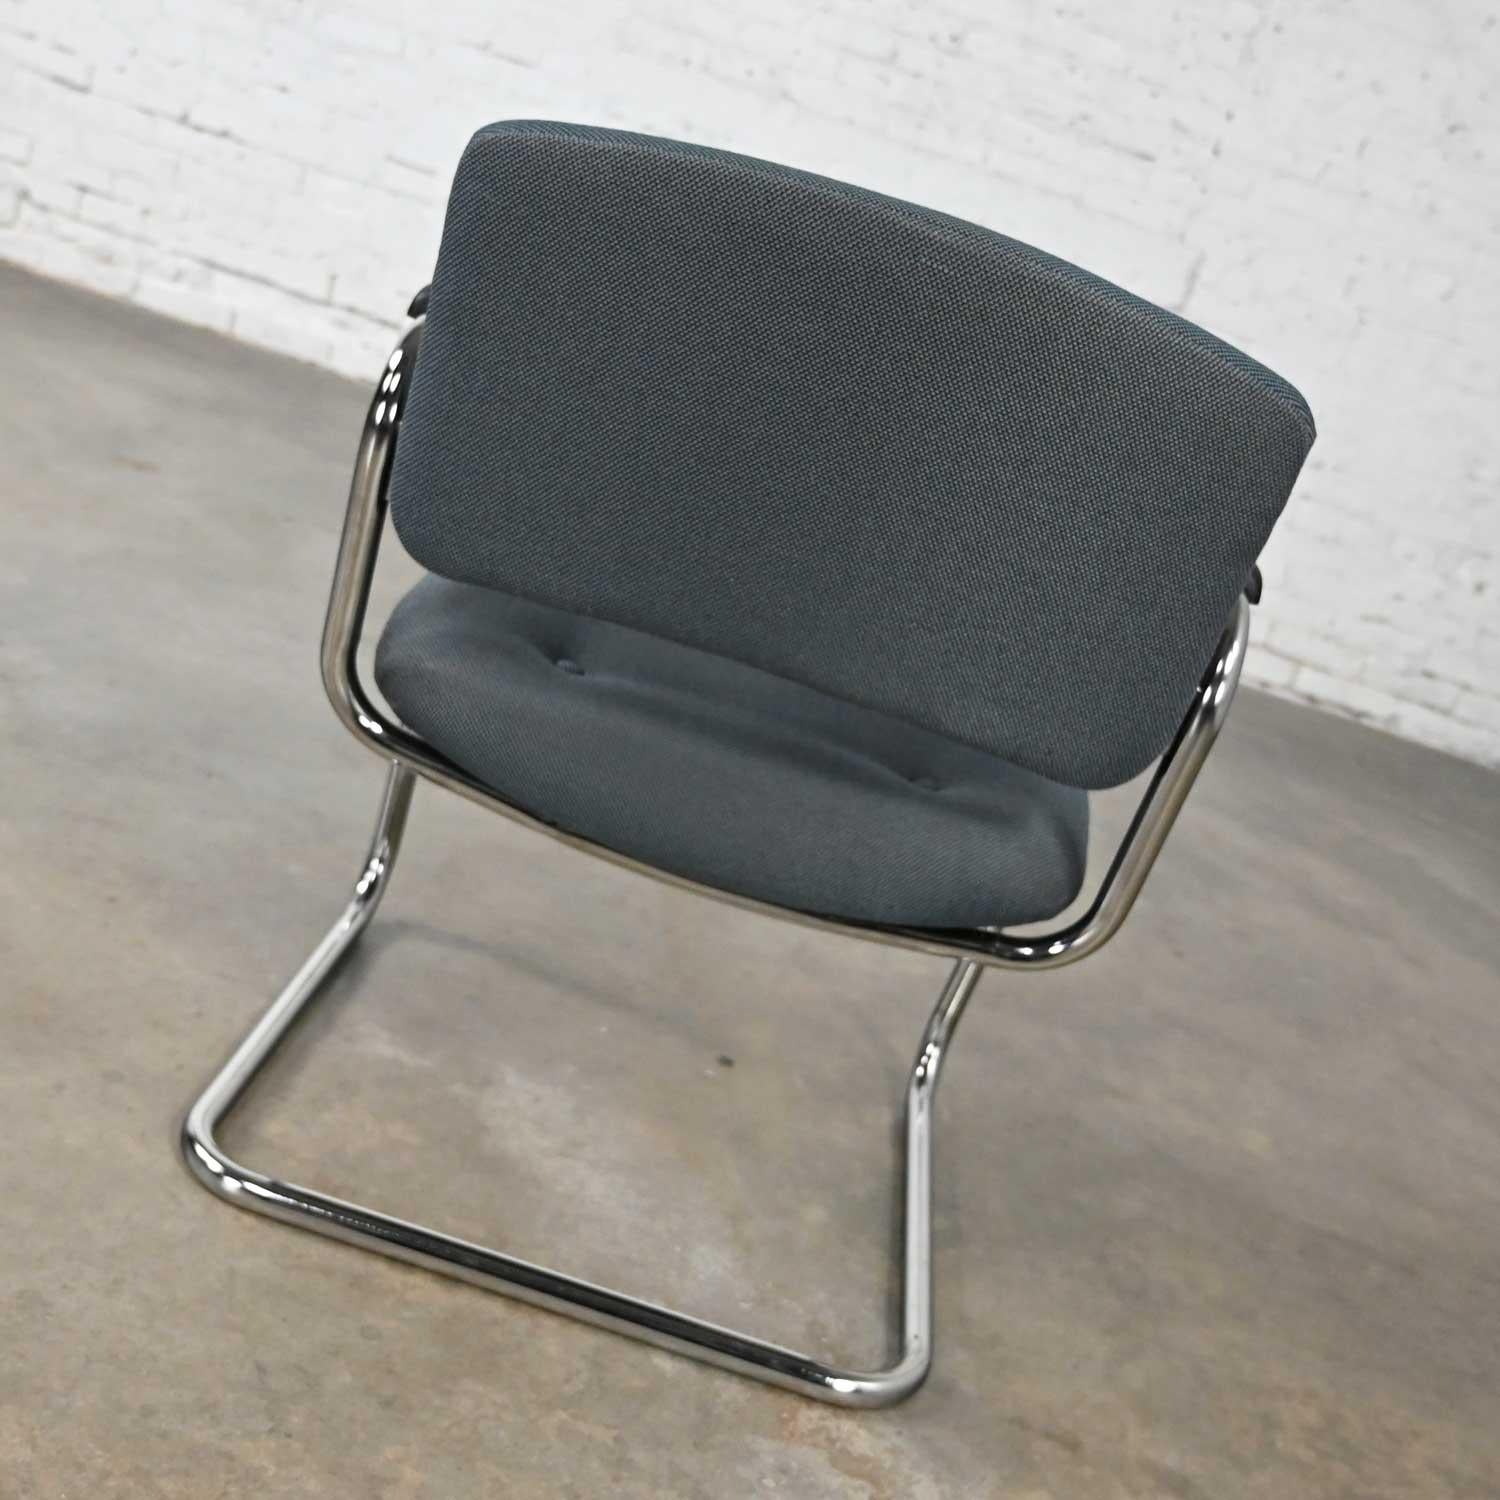 American Vintage Chrome Cantilever Chairs United Chair Co Style Steelcase Sold Separately For Sale